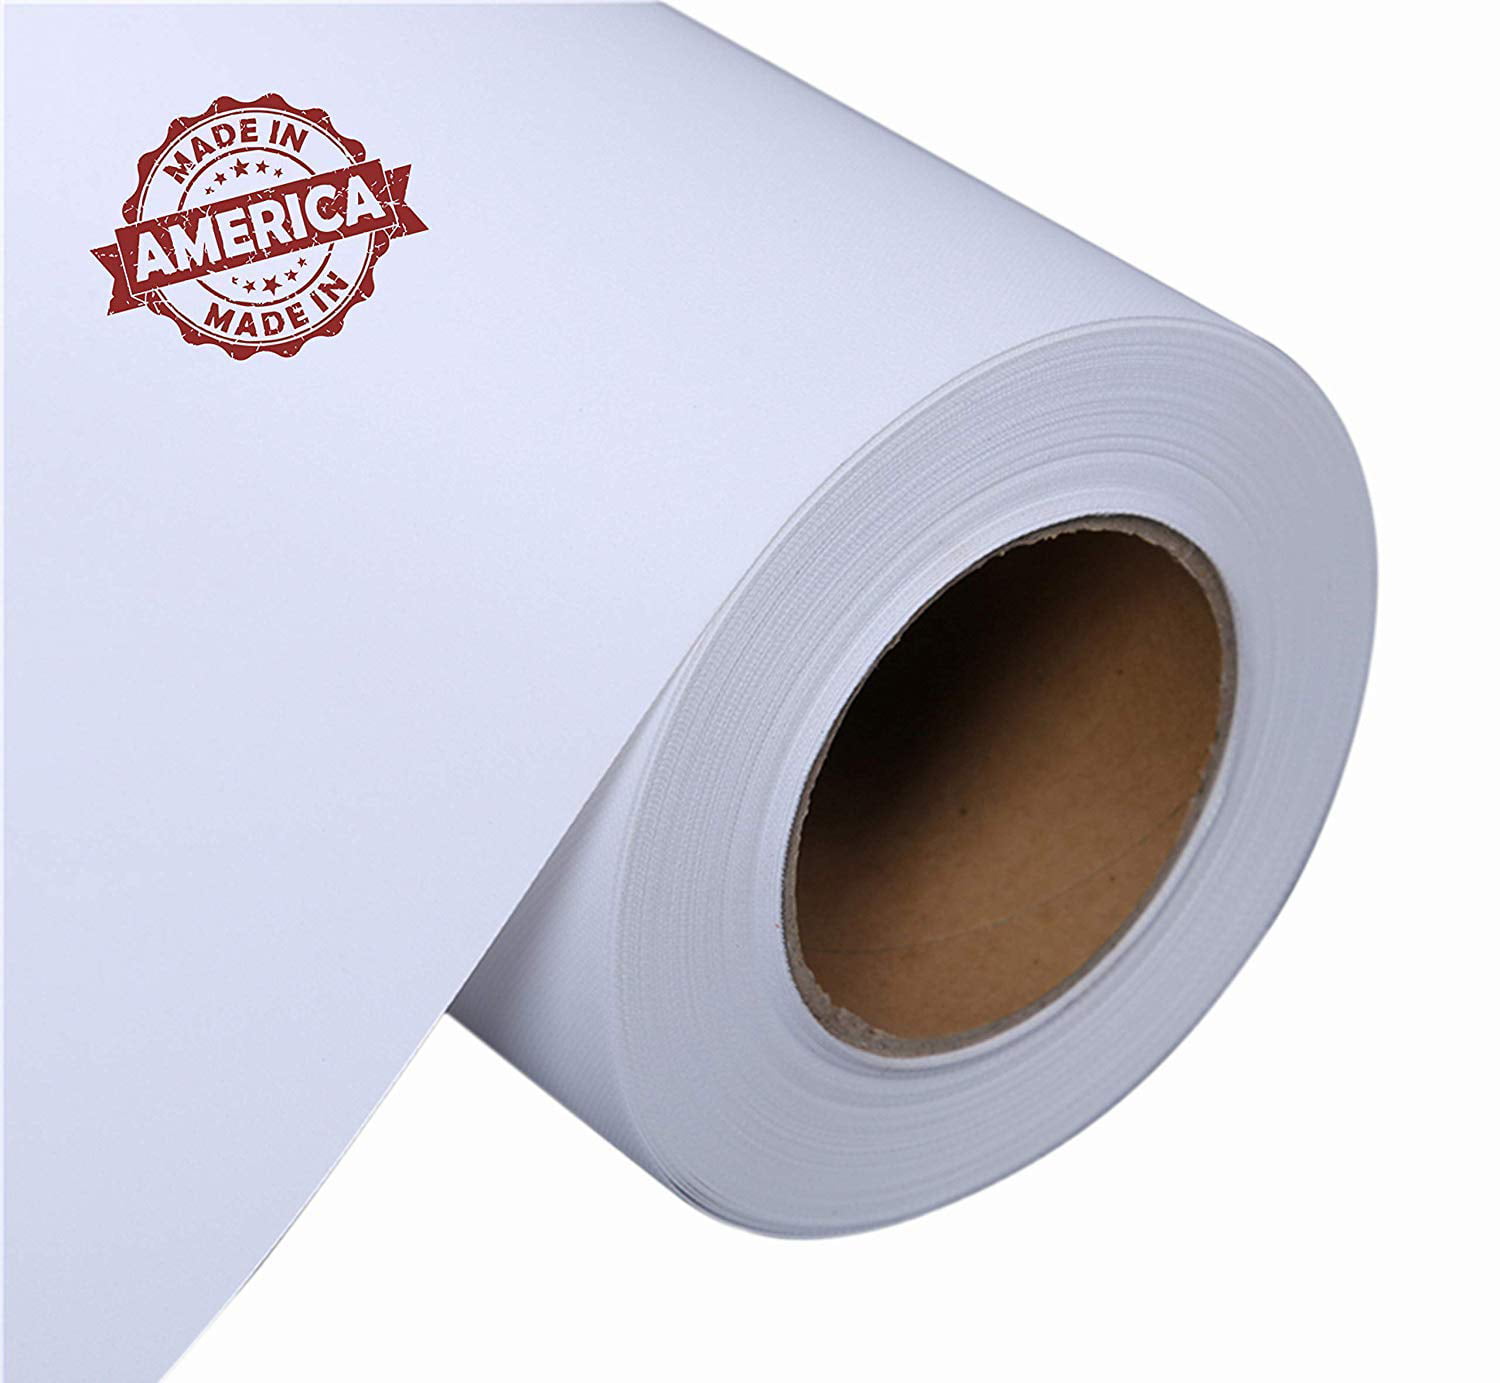 60 in x 40 ft roll，Waterproof Matte Polyester Inkjet Canvas for EPSON,HP,CANON 